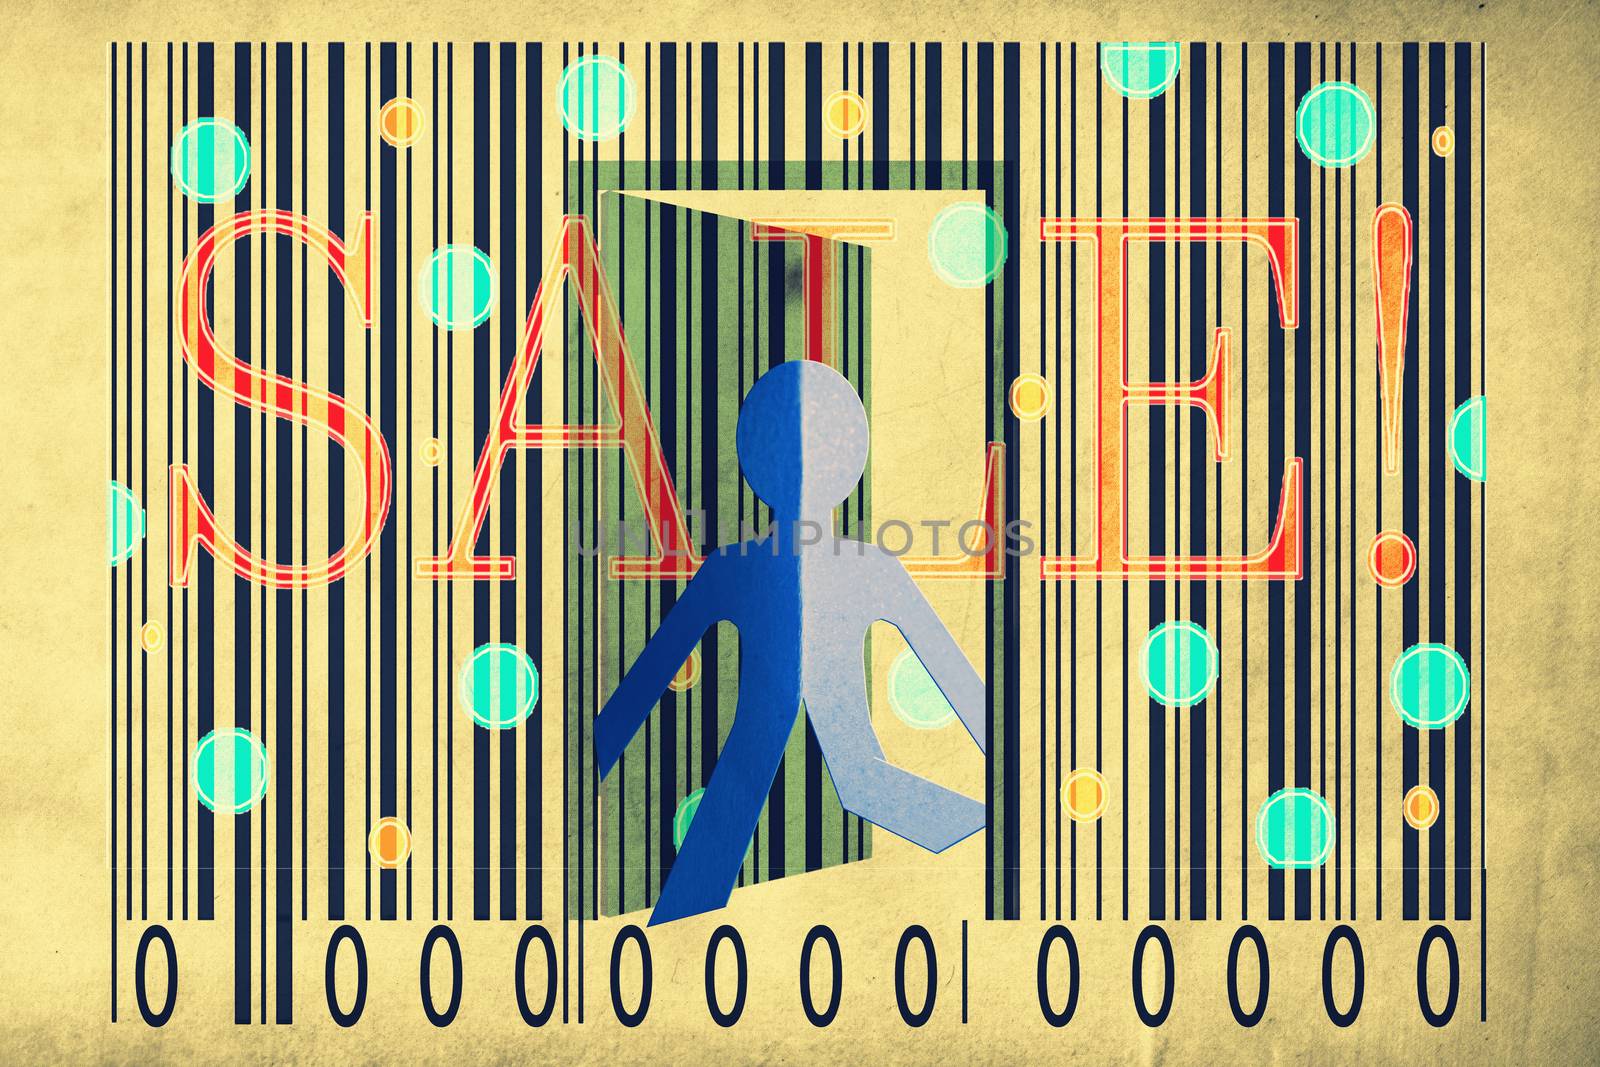 Paperman coming out of a bar code with Sale Word by yands